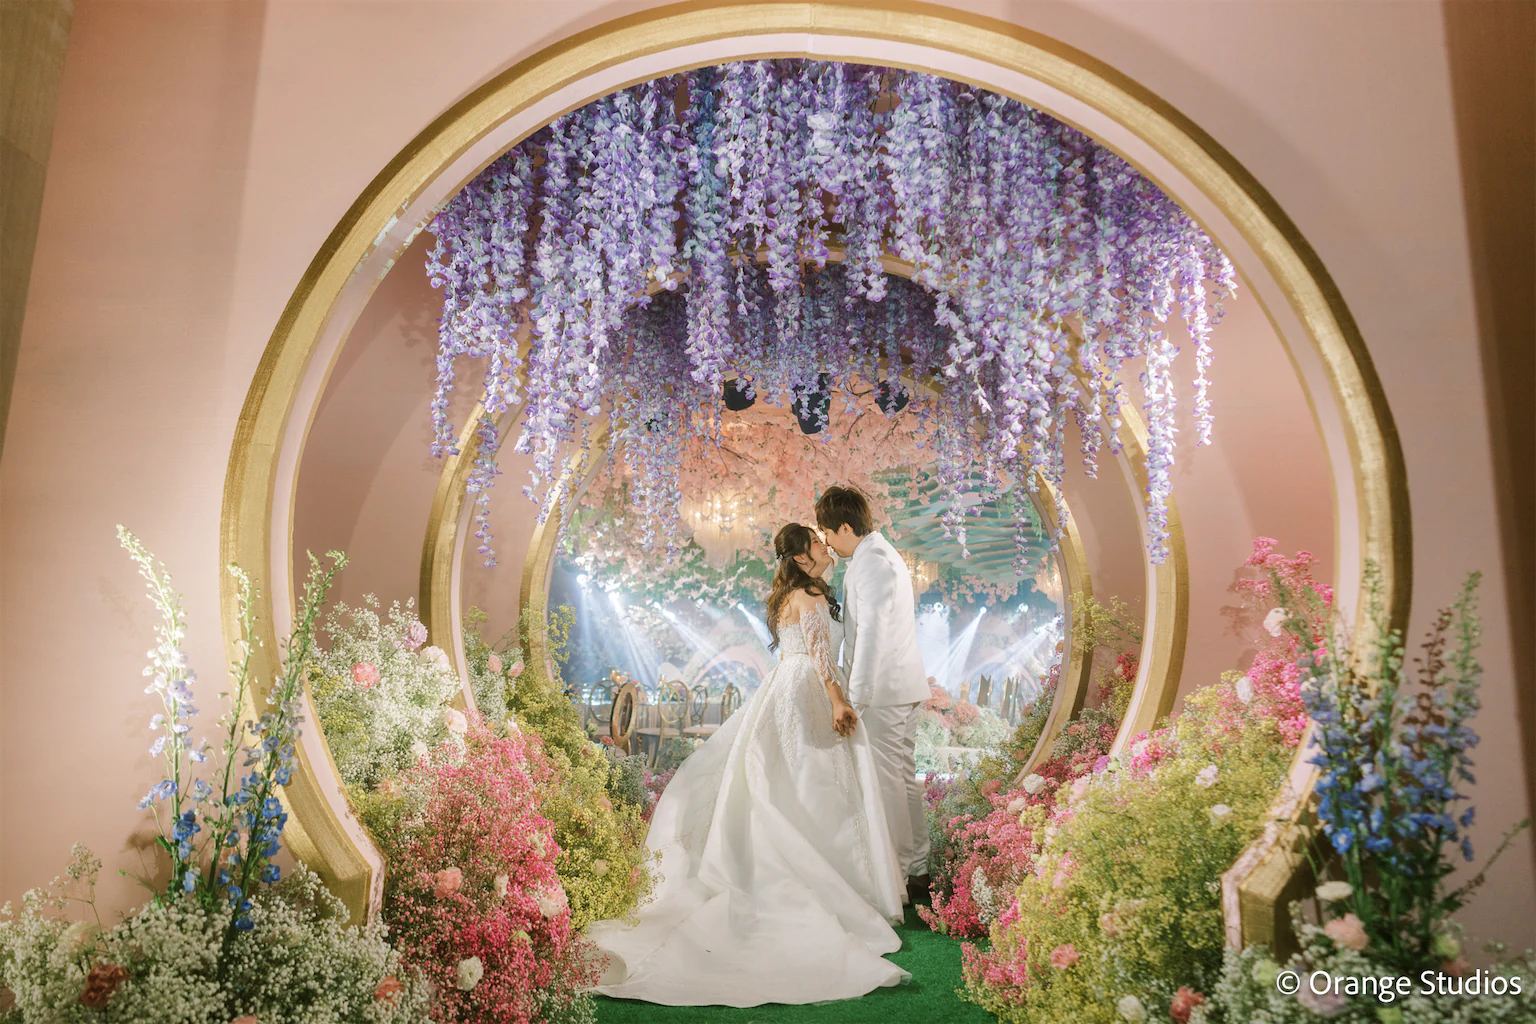 Entrance tunnel for the Japanese springtime theme wedding of Taiki and Michelle by designer Khim Cruz